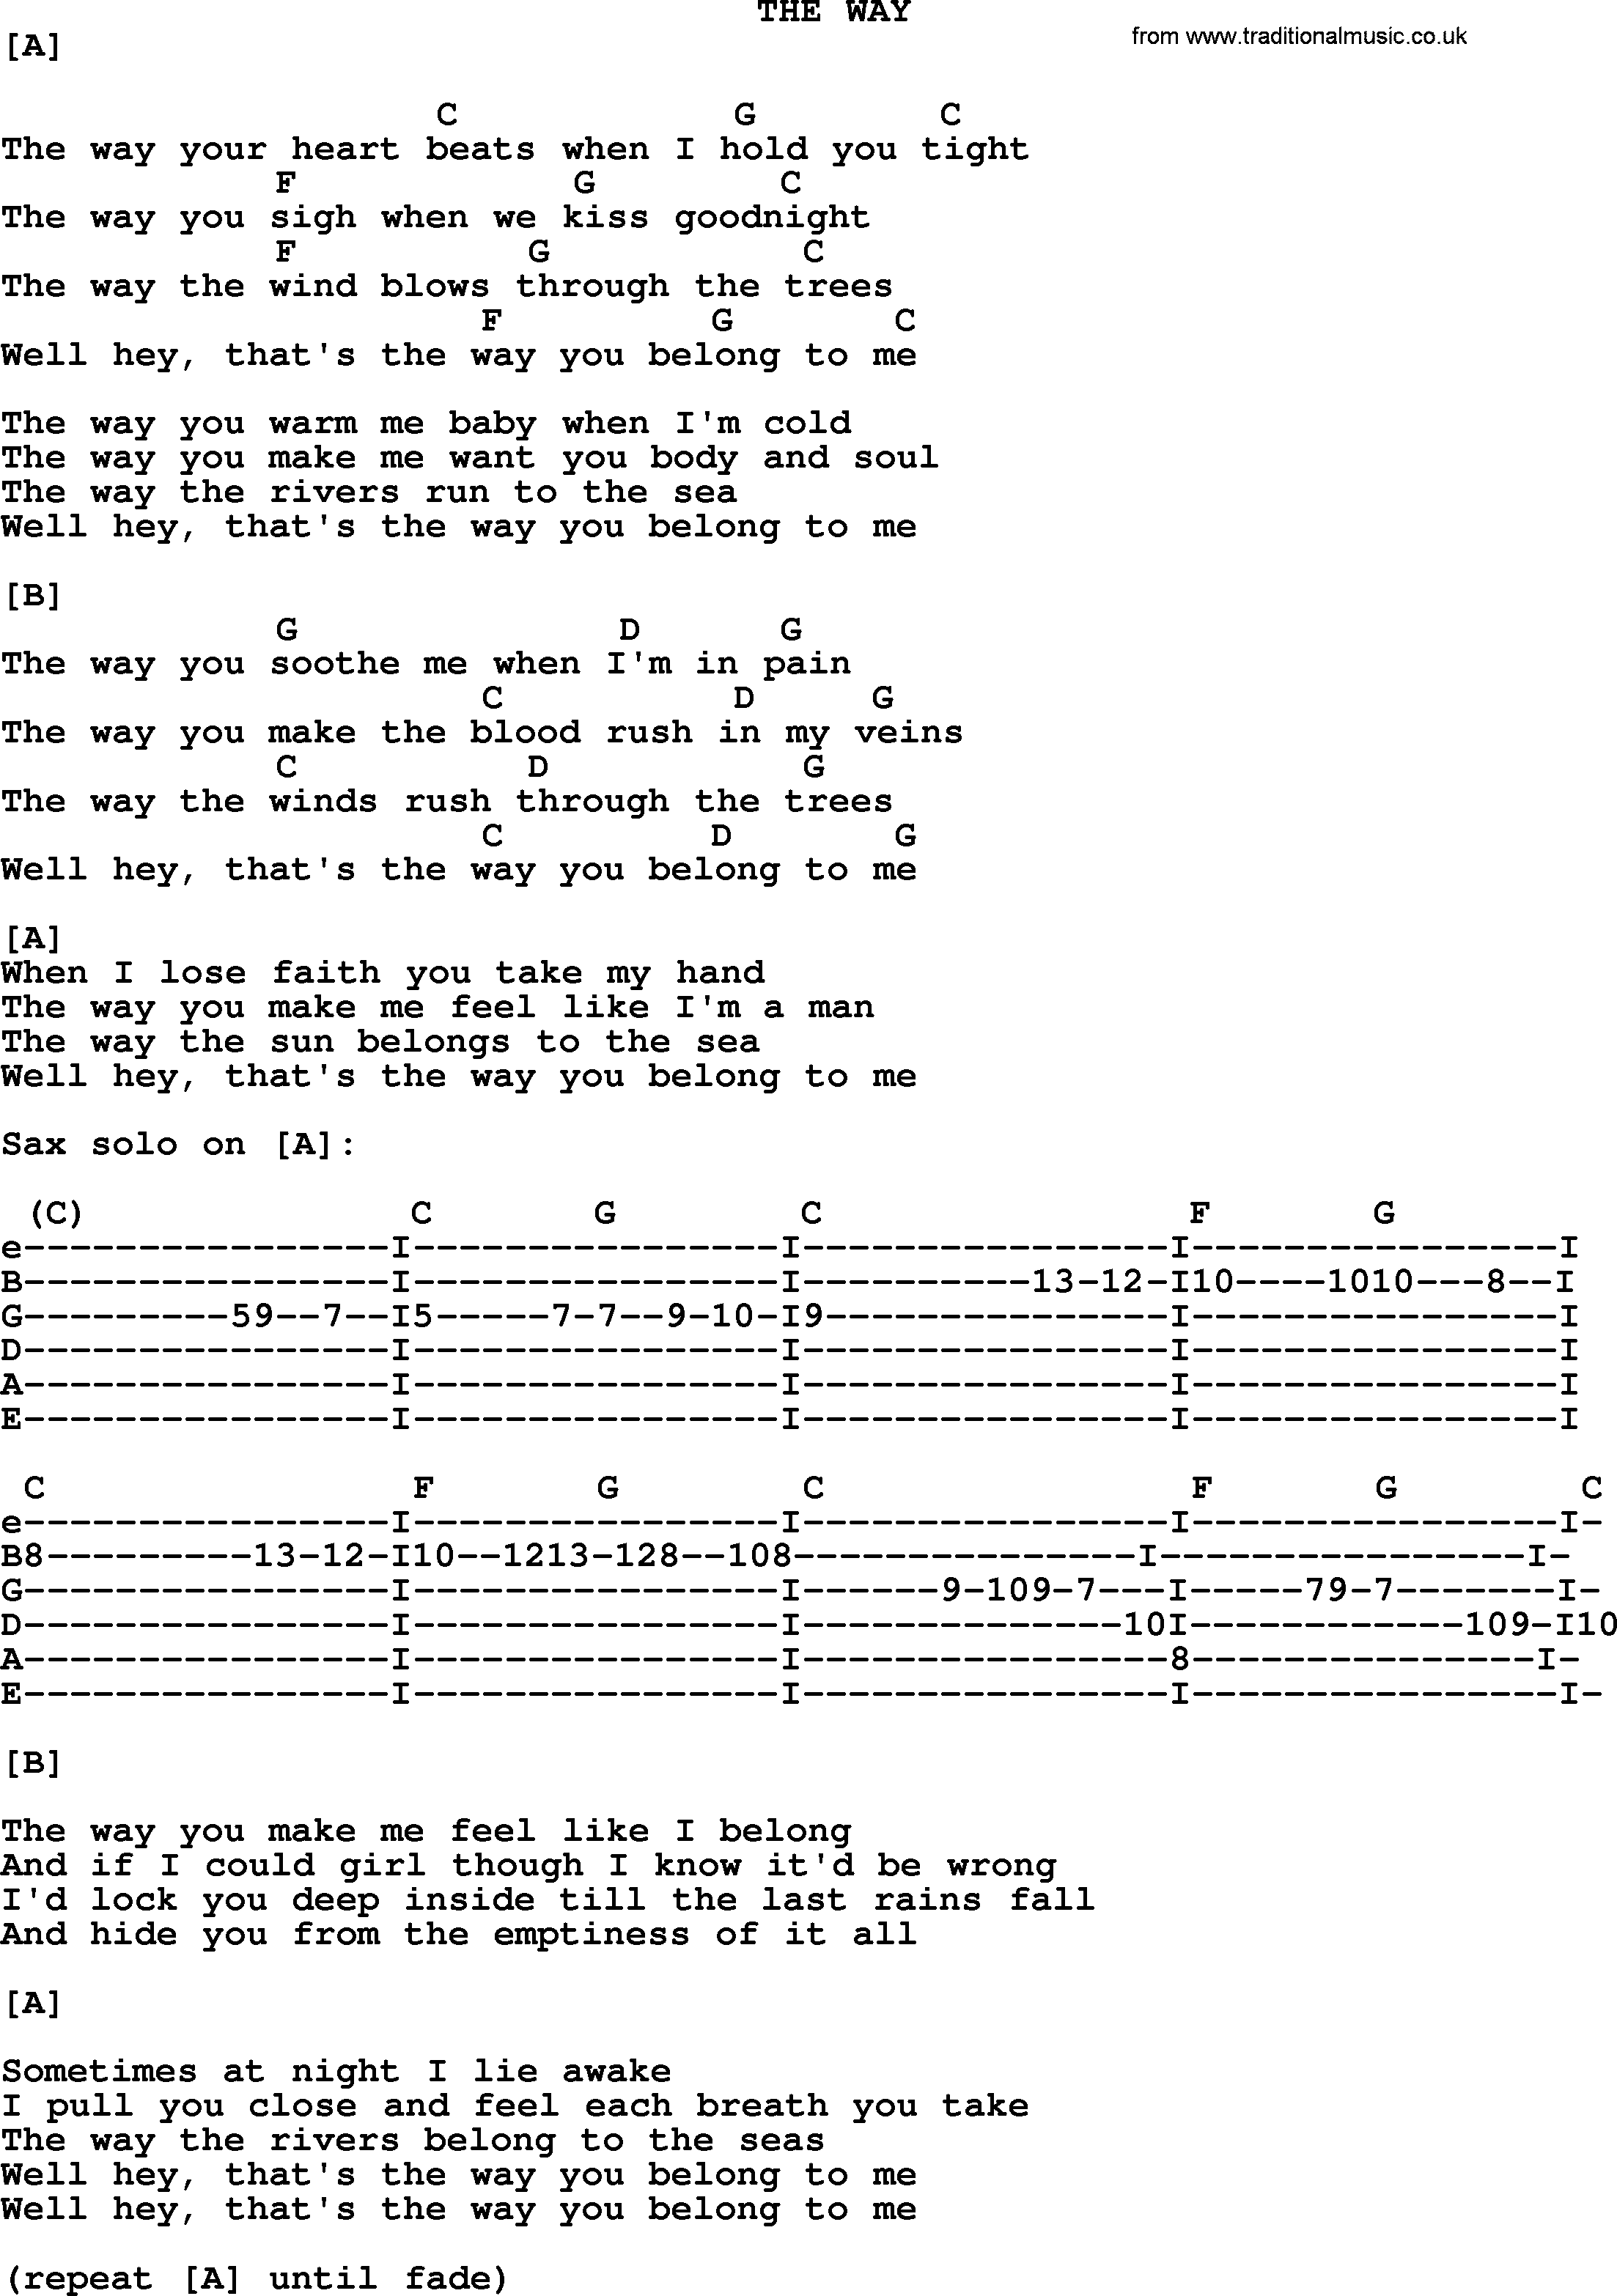 Bruce Springsteen song: The Way, lyrics and chords